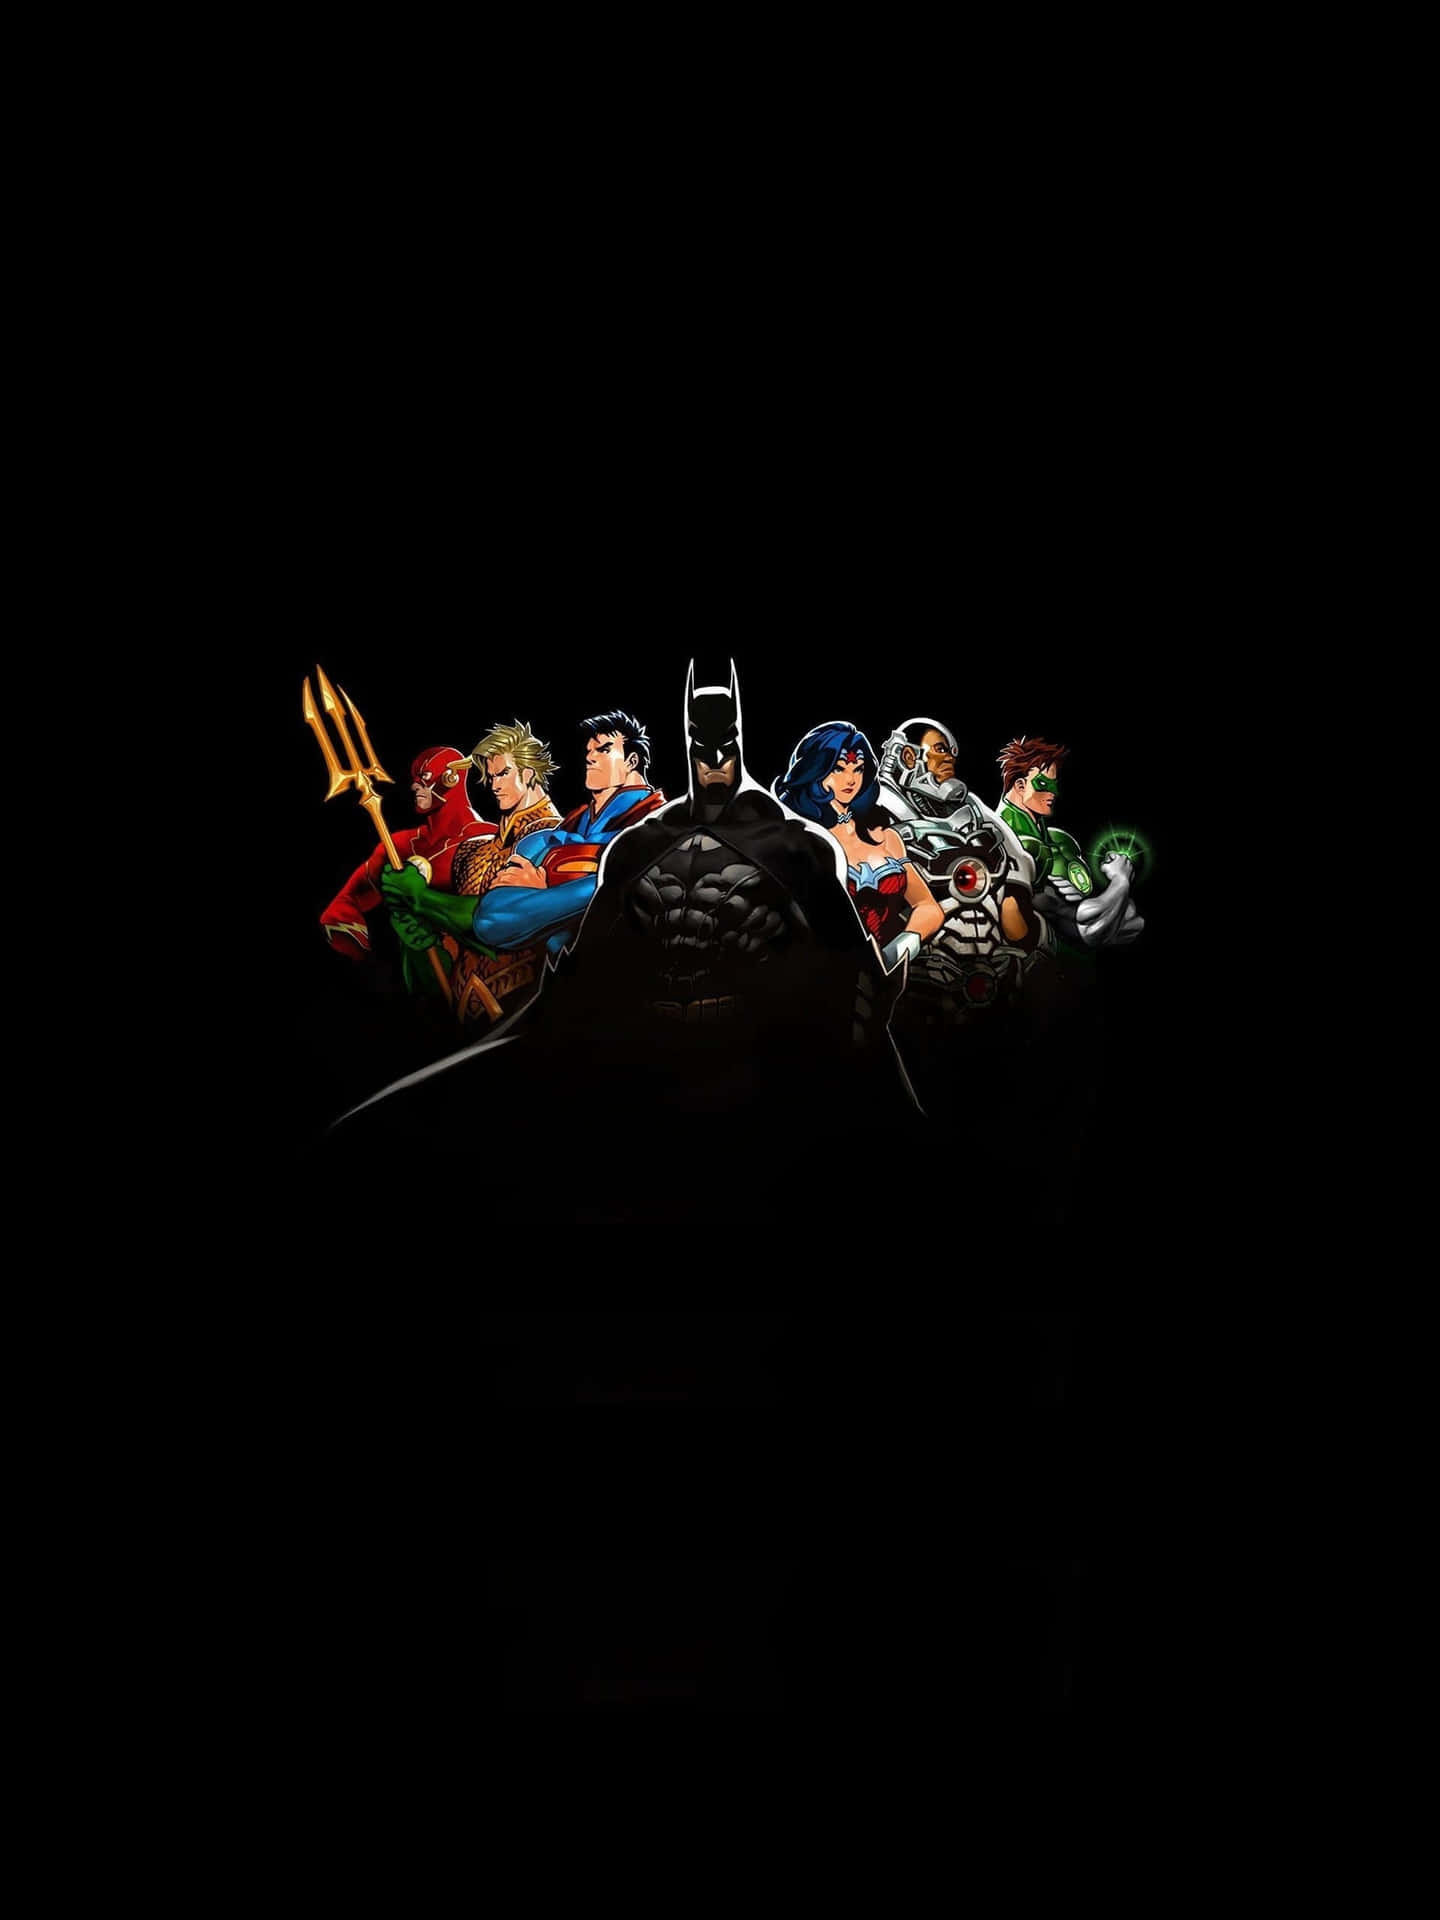 Unite the world of superheroes on your iPhone! Wallpaper